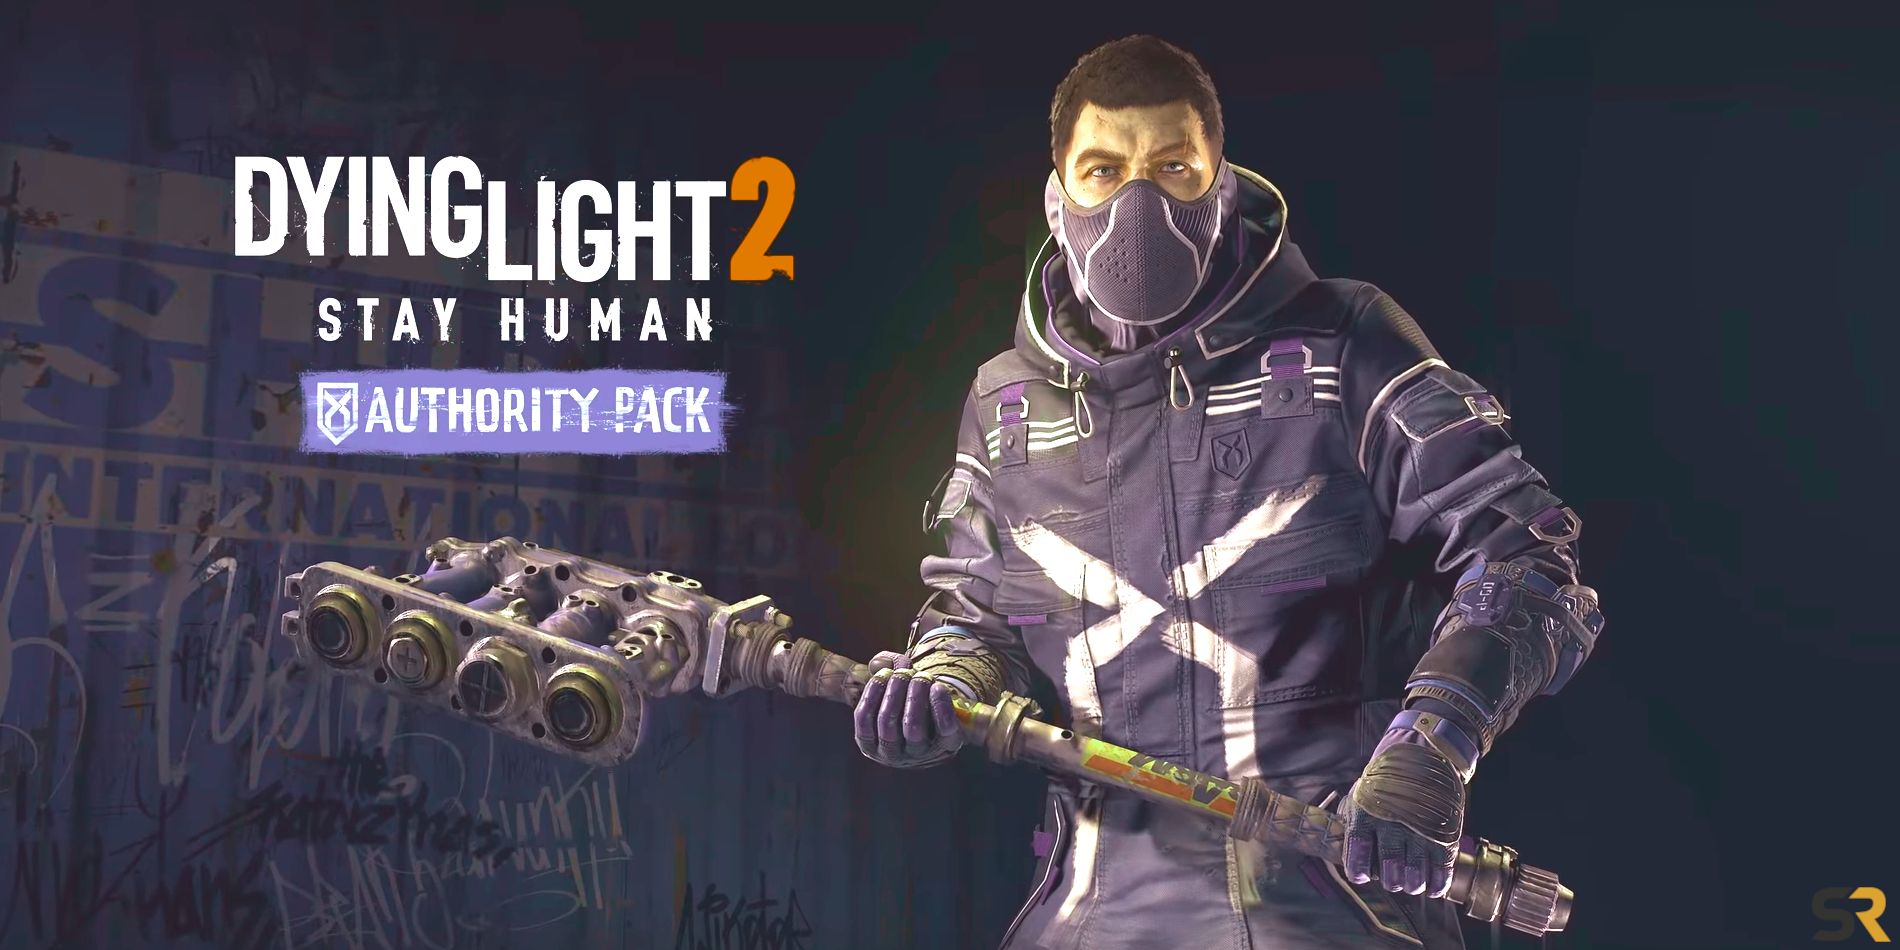 New Dying Light 2 DLC Authority Pack Announced Part 1